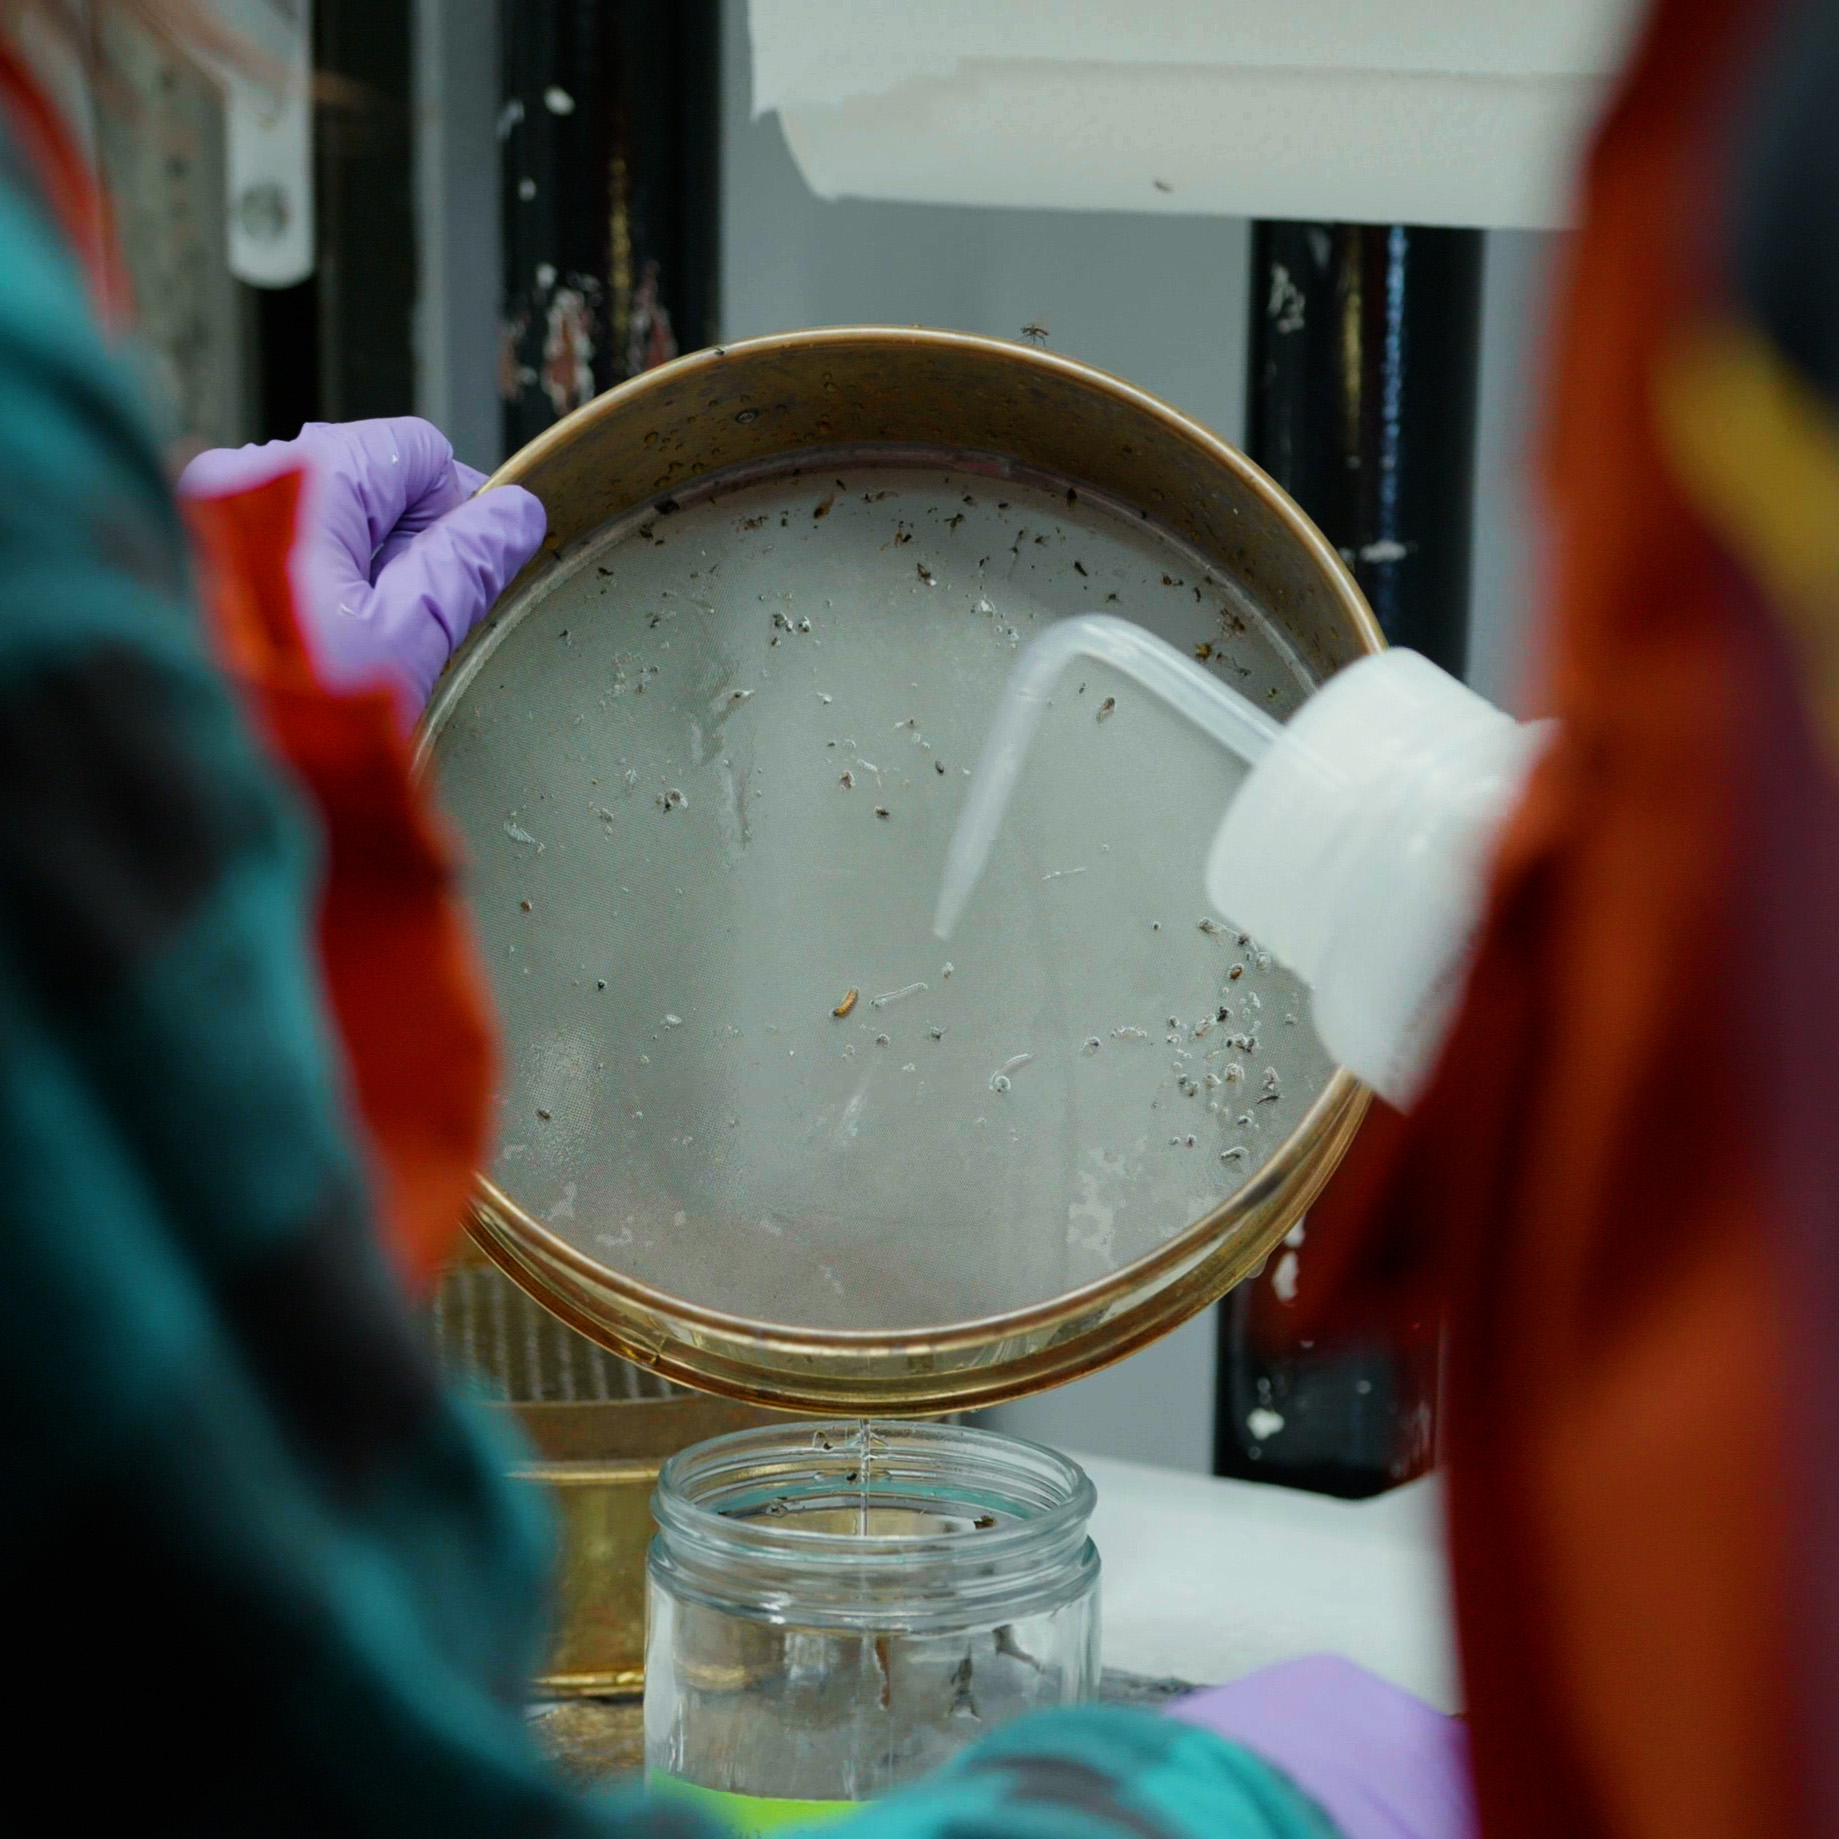 Researchers filtering materials through a sieve.  